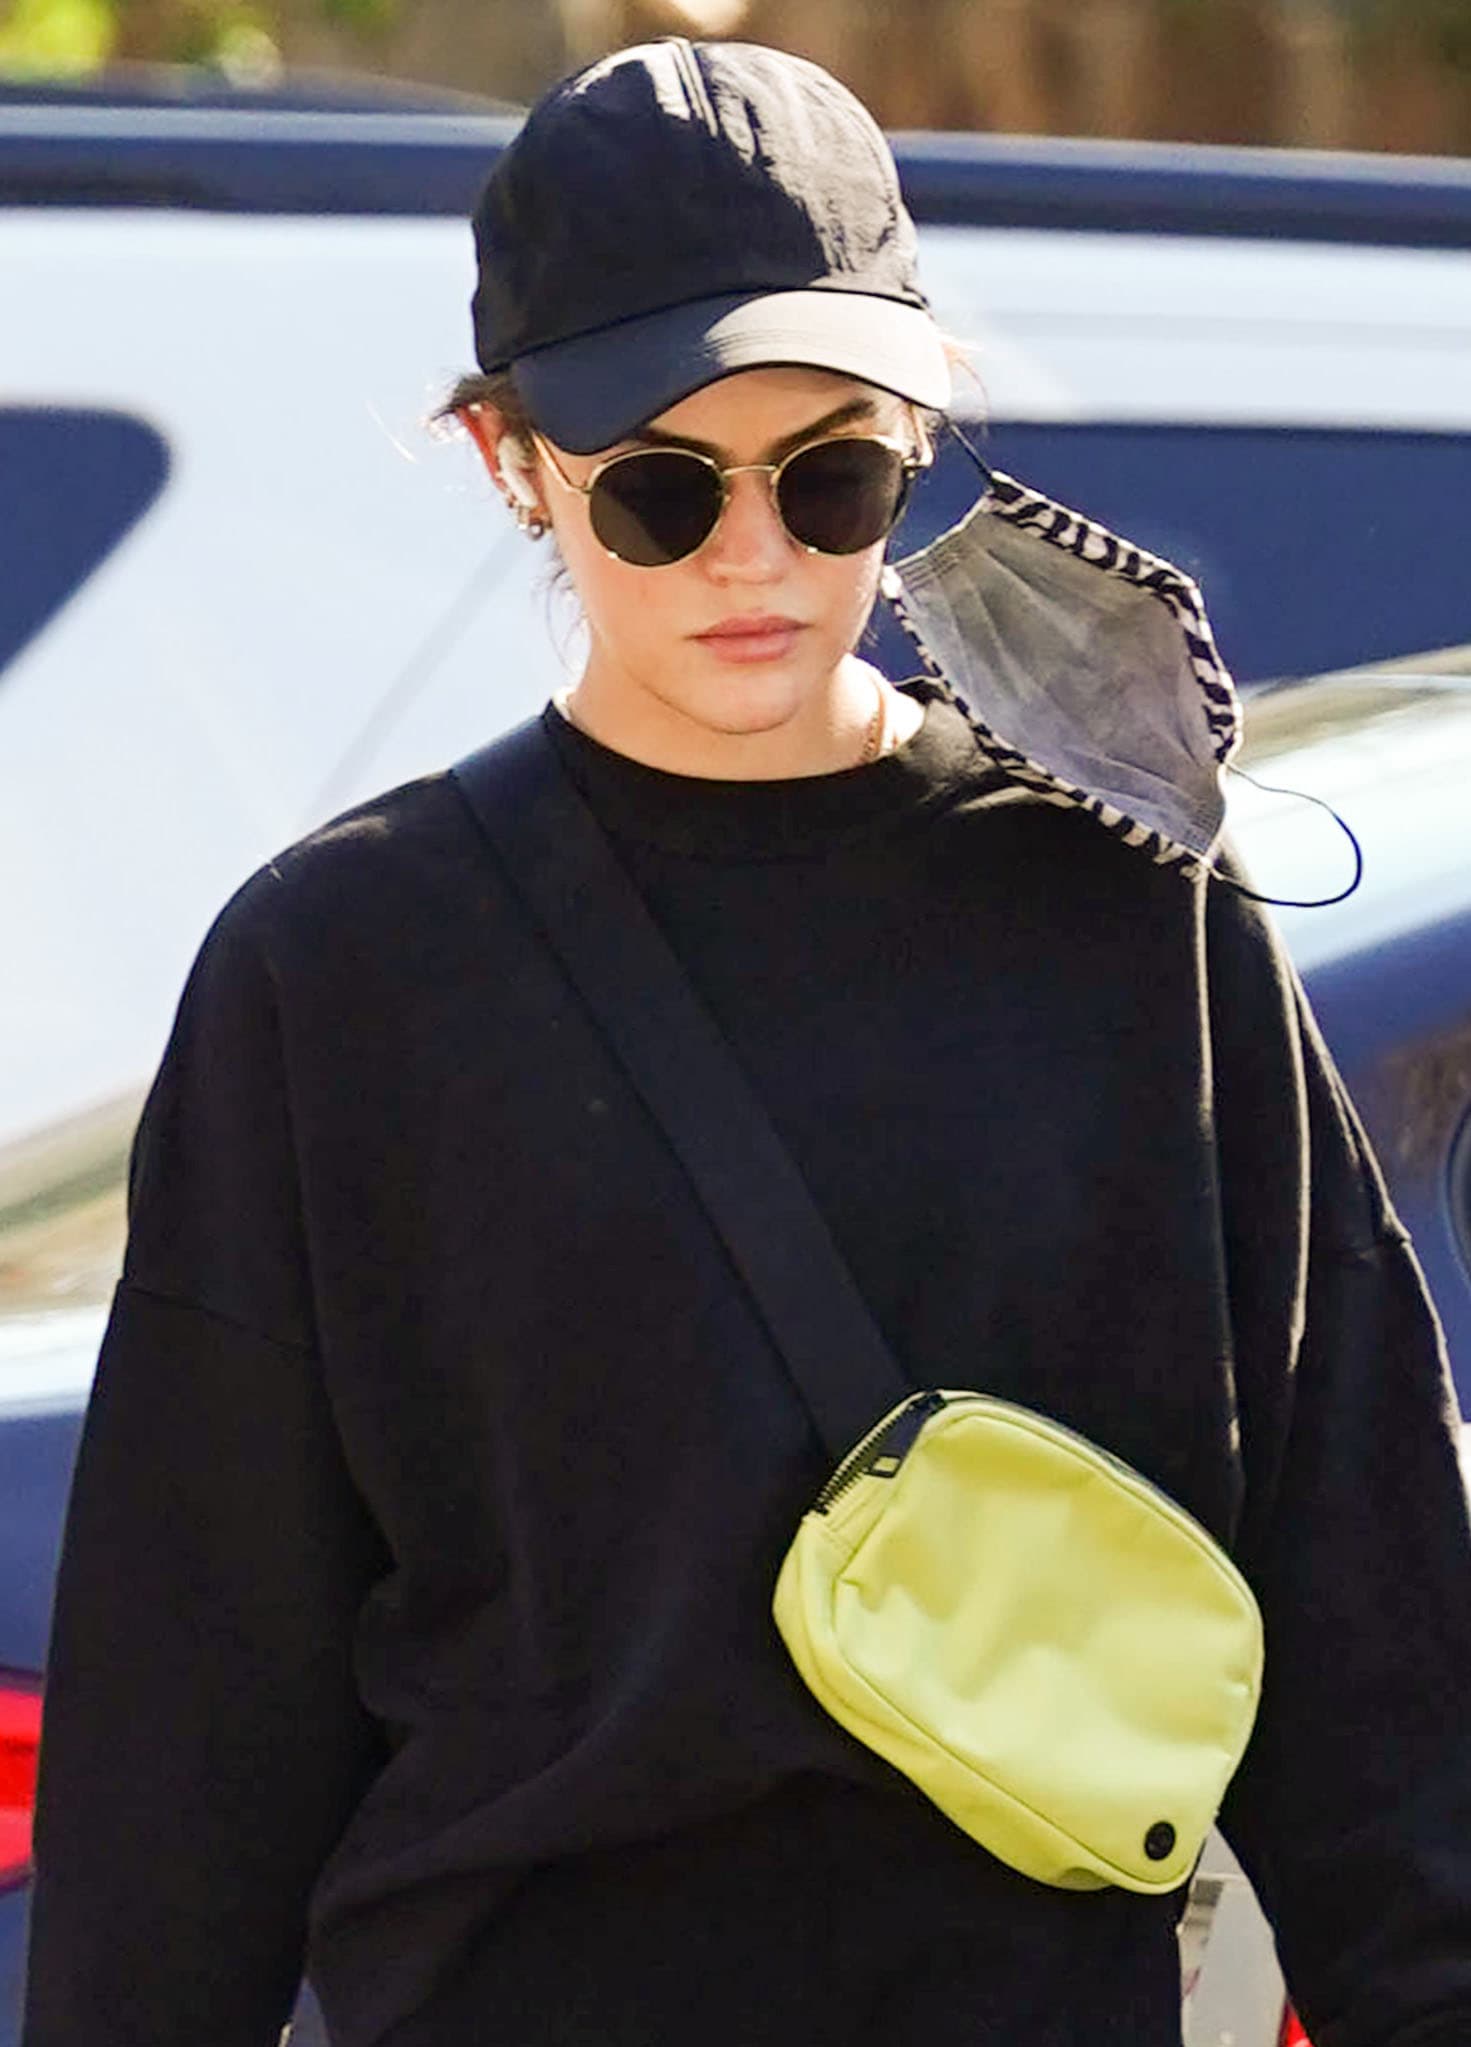 Lucy Hale adds a pop of neon yellow to her look with a Lululemon belt bag